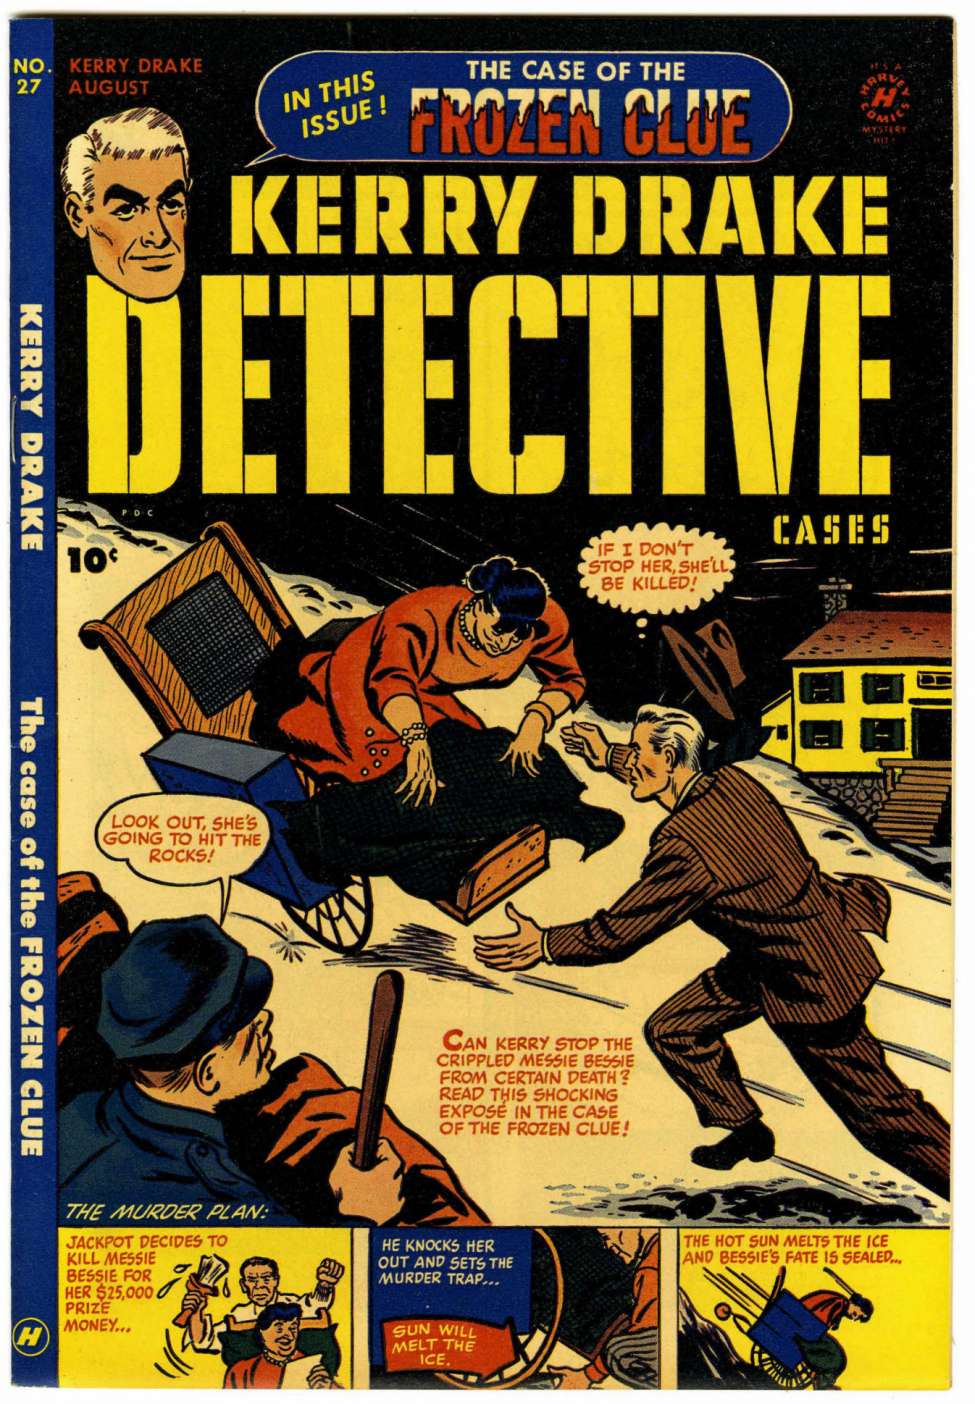 Comic Book Cover For Kerry Drake Detective Cases 27